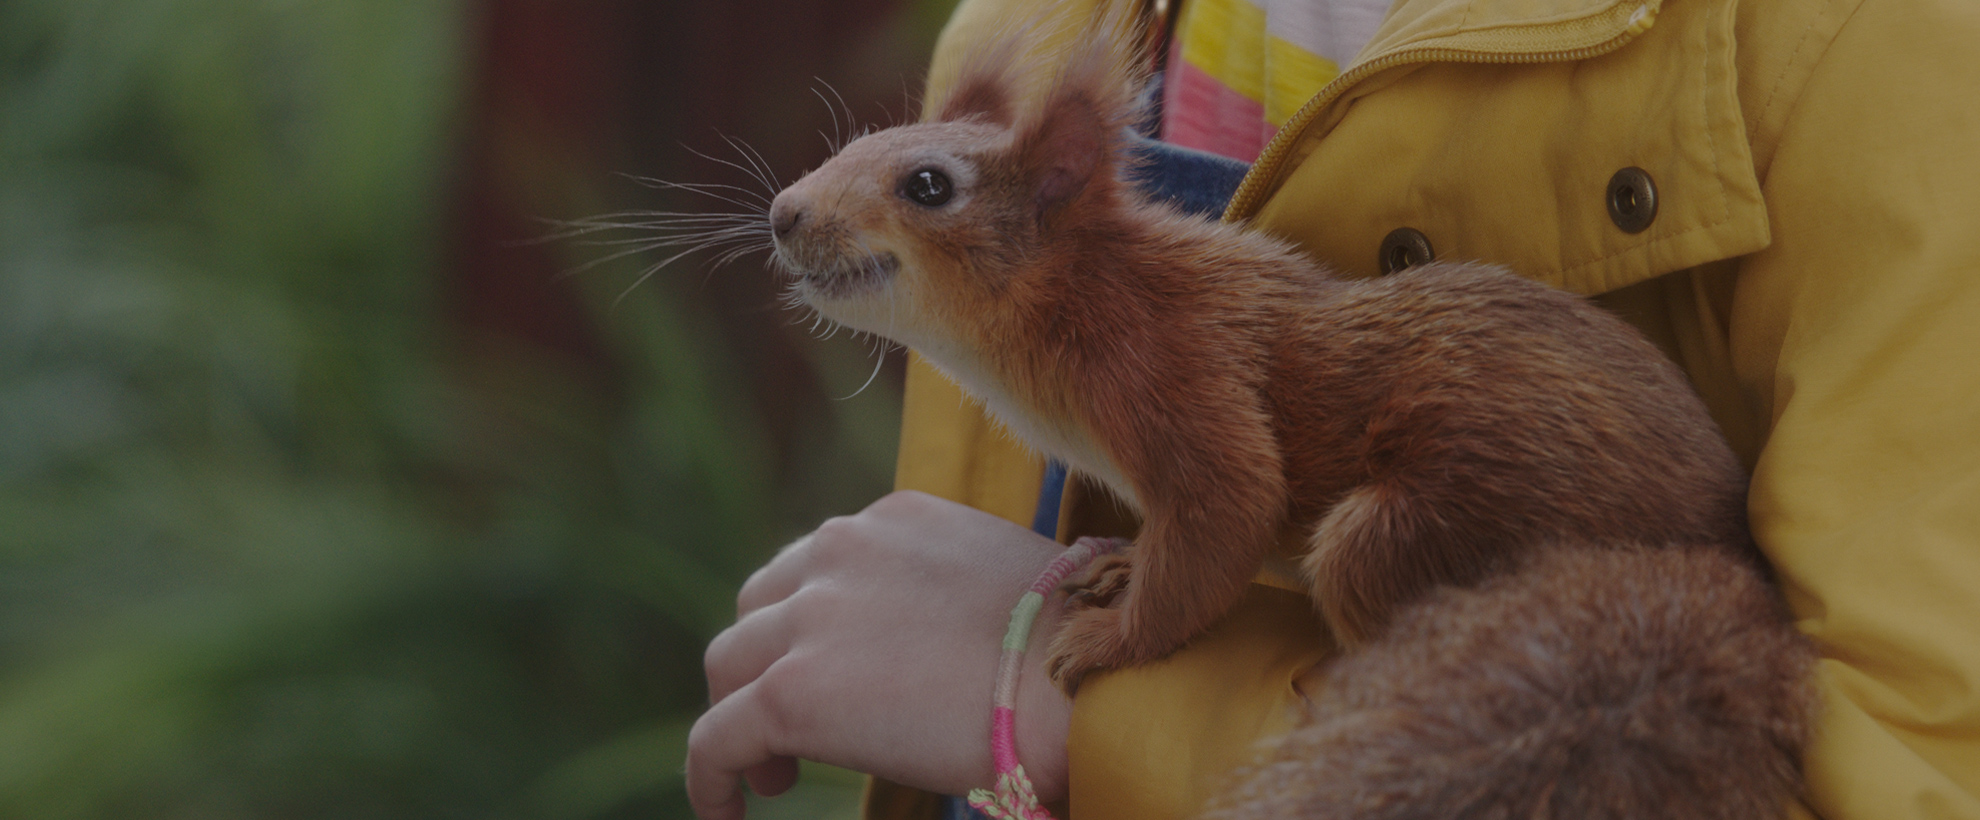 A red squirrel sits on the arm and hand of a young girl wearing a yellow raincoat